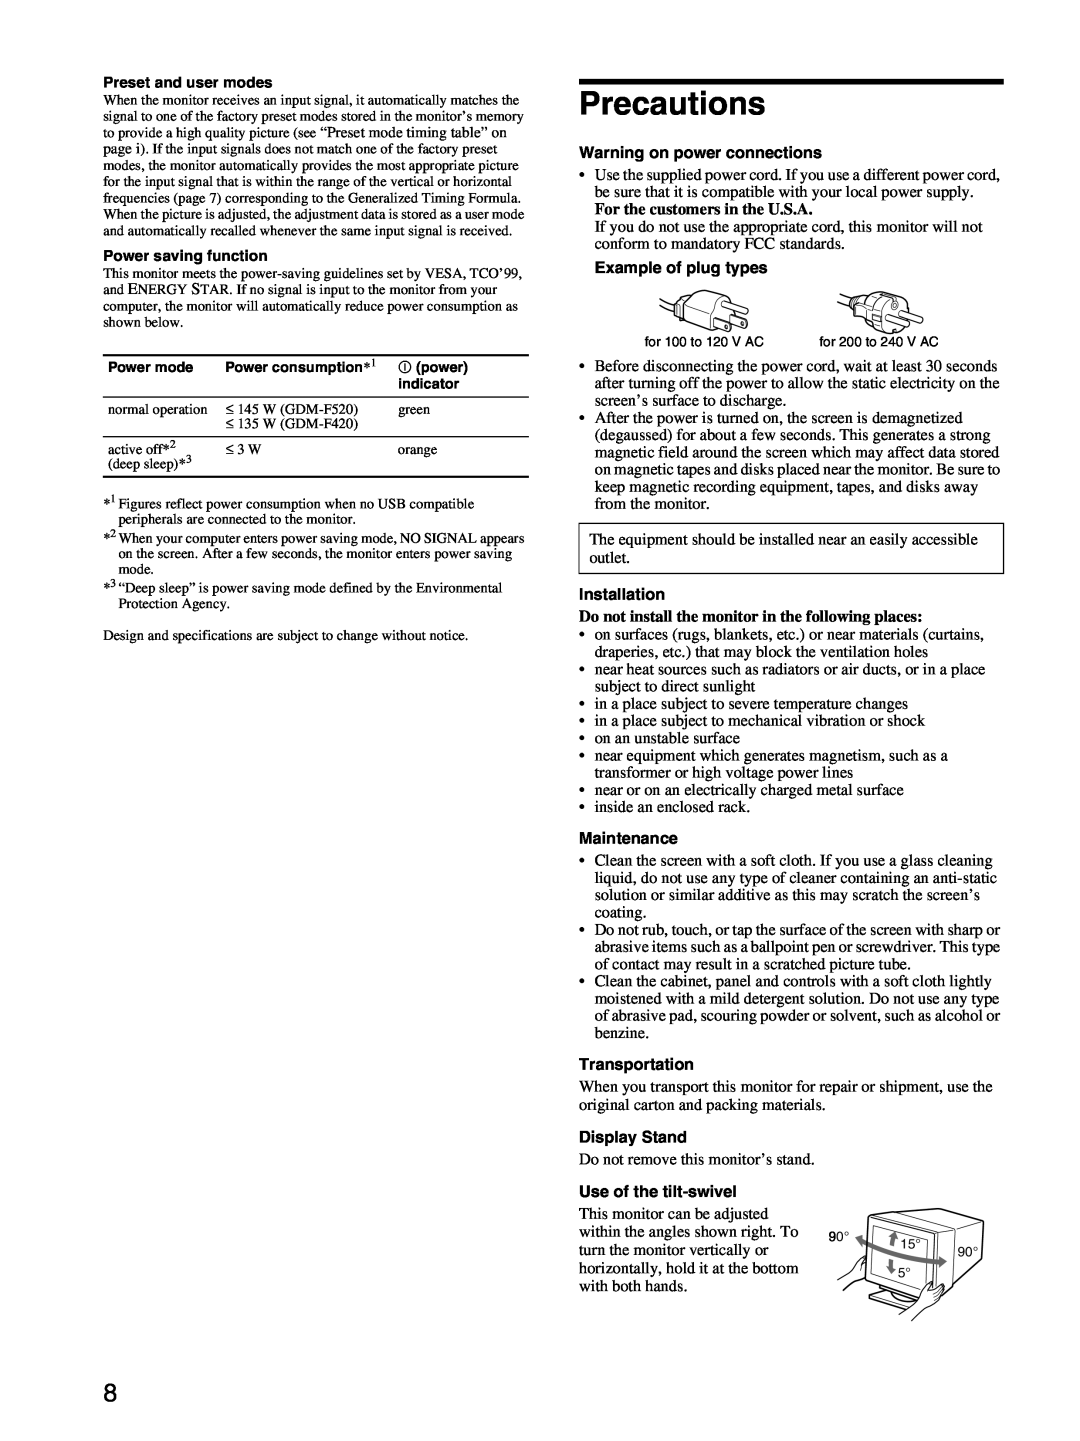 Sony GDM-F520 manual Precautions, Warning on power connections, For the customers in the U.S.A, Example of plug types 